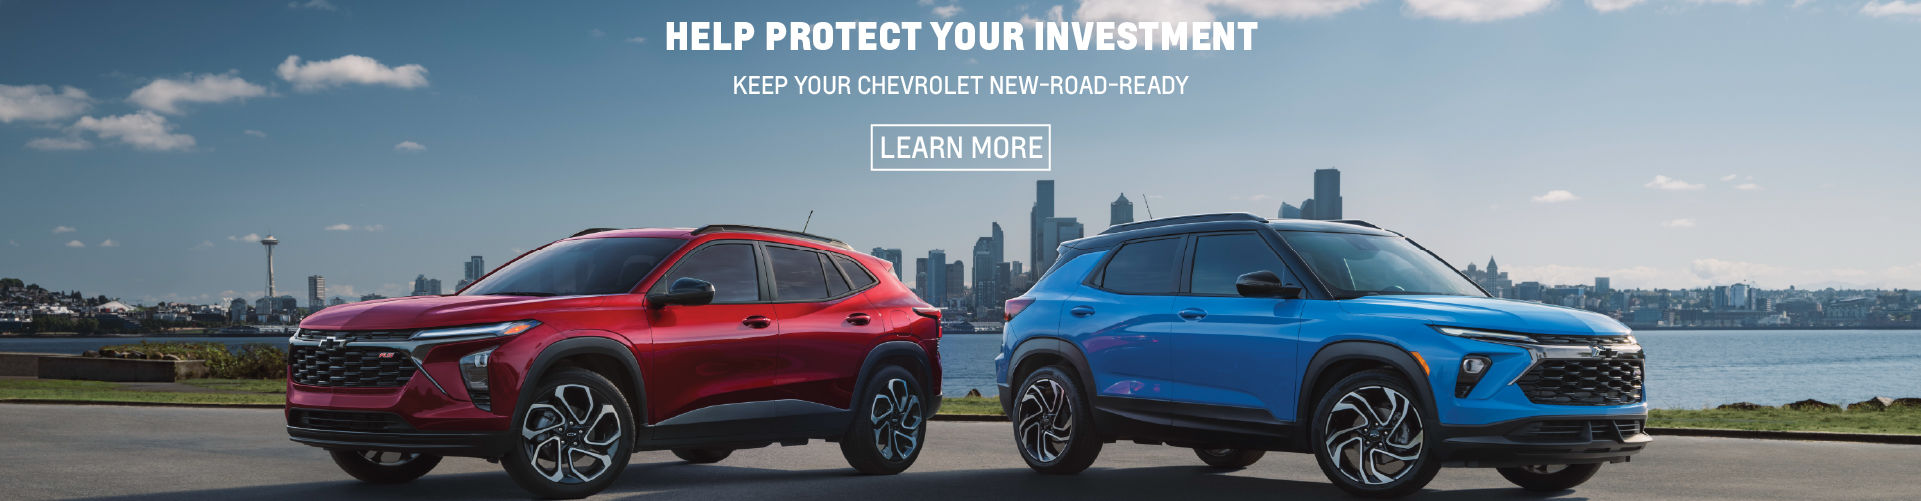 Protection Plan Chevrolet